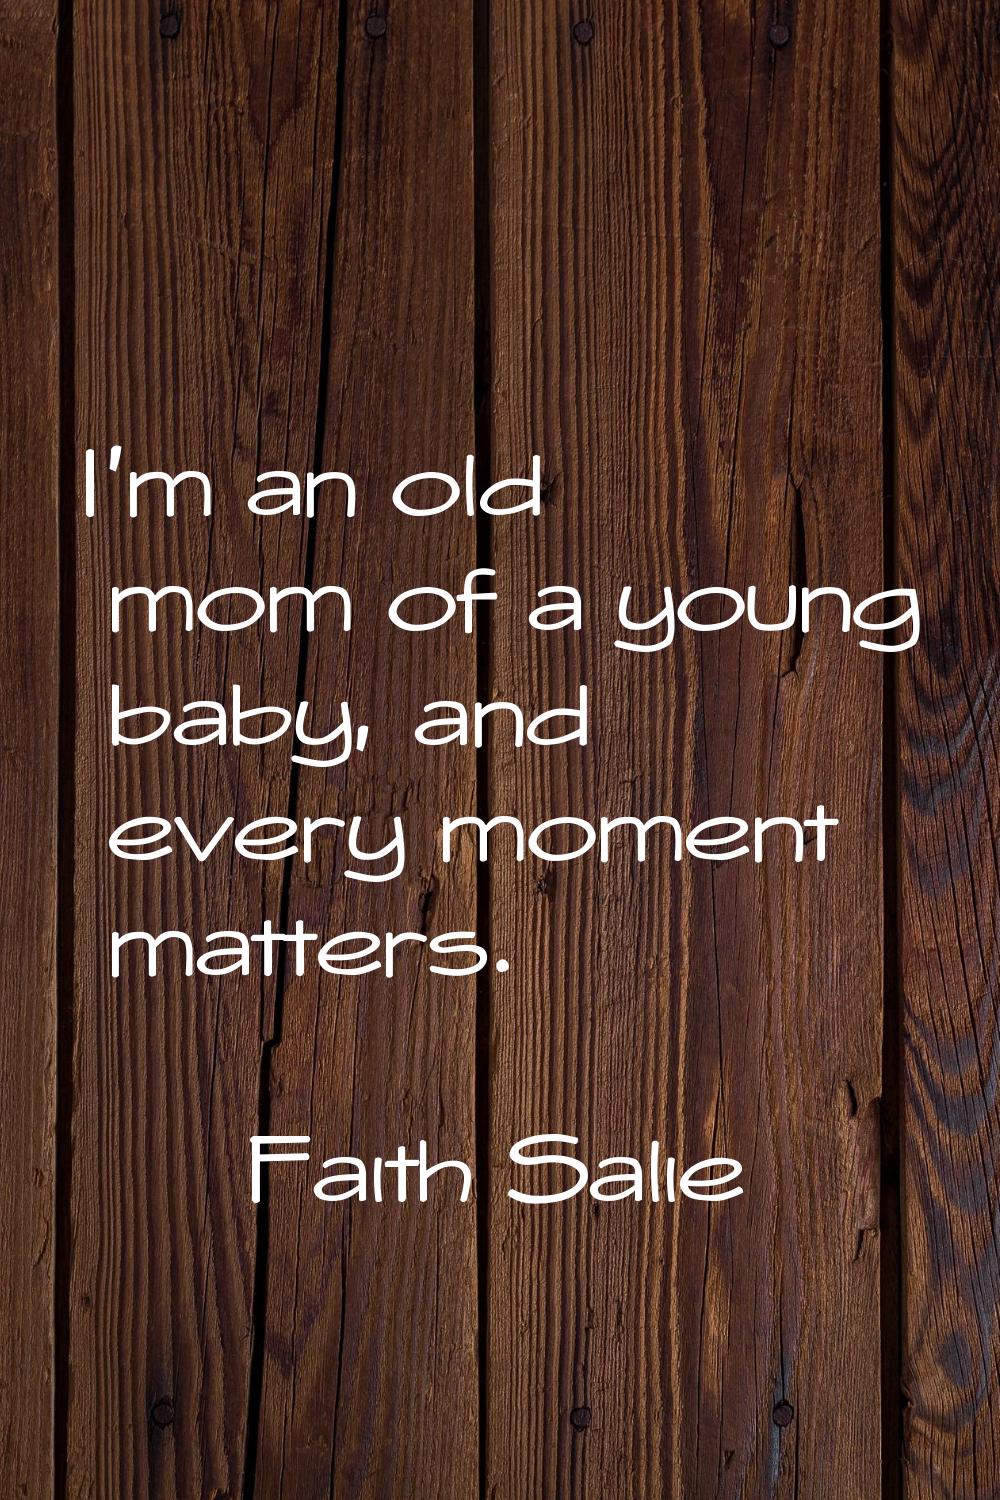 I'm an old mom of a young baby, and every moment matters.